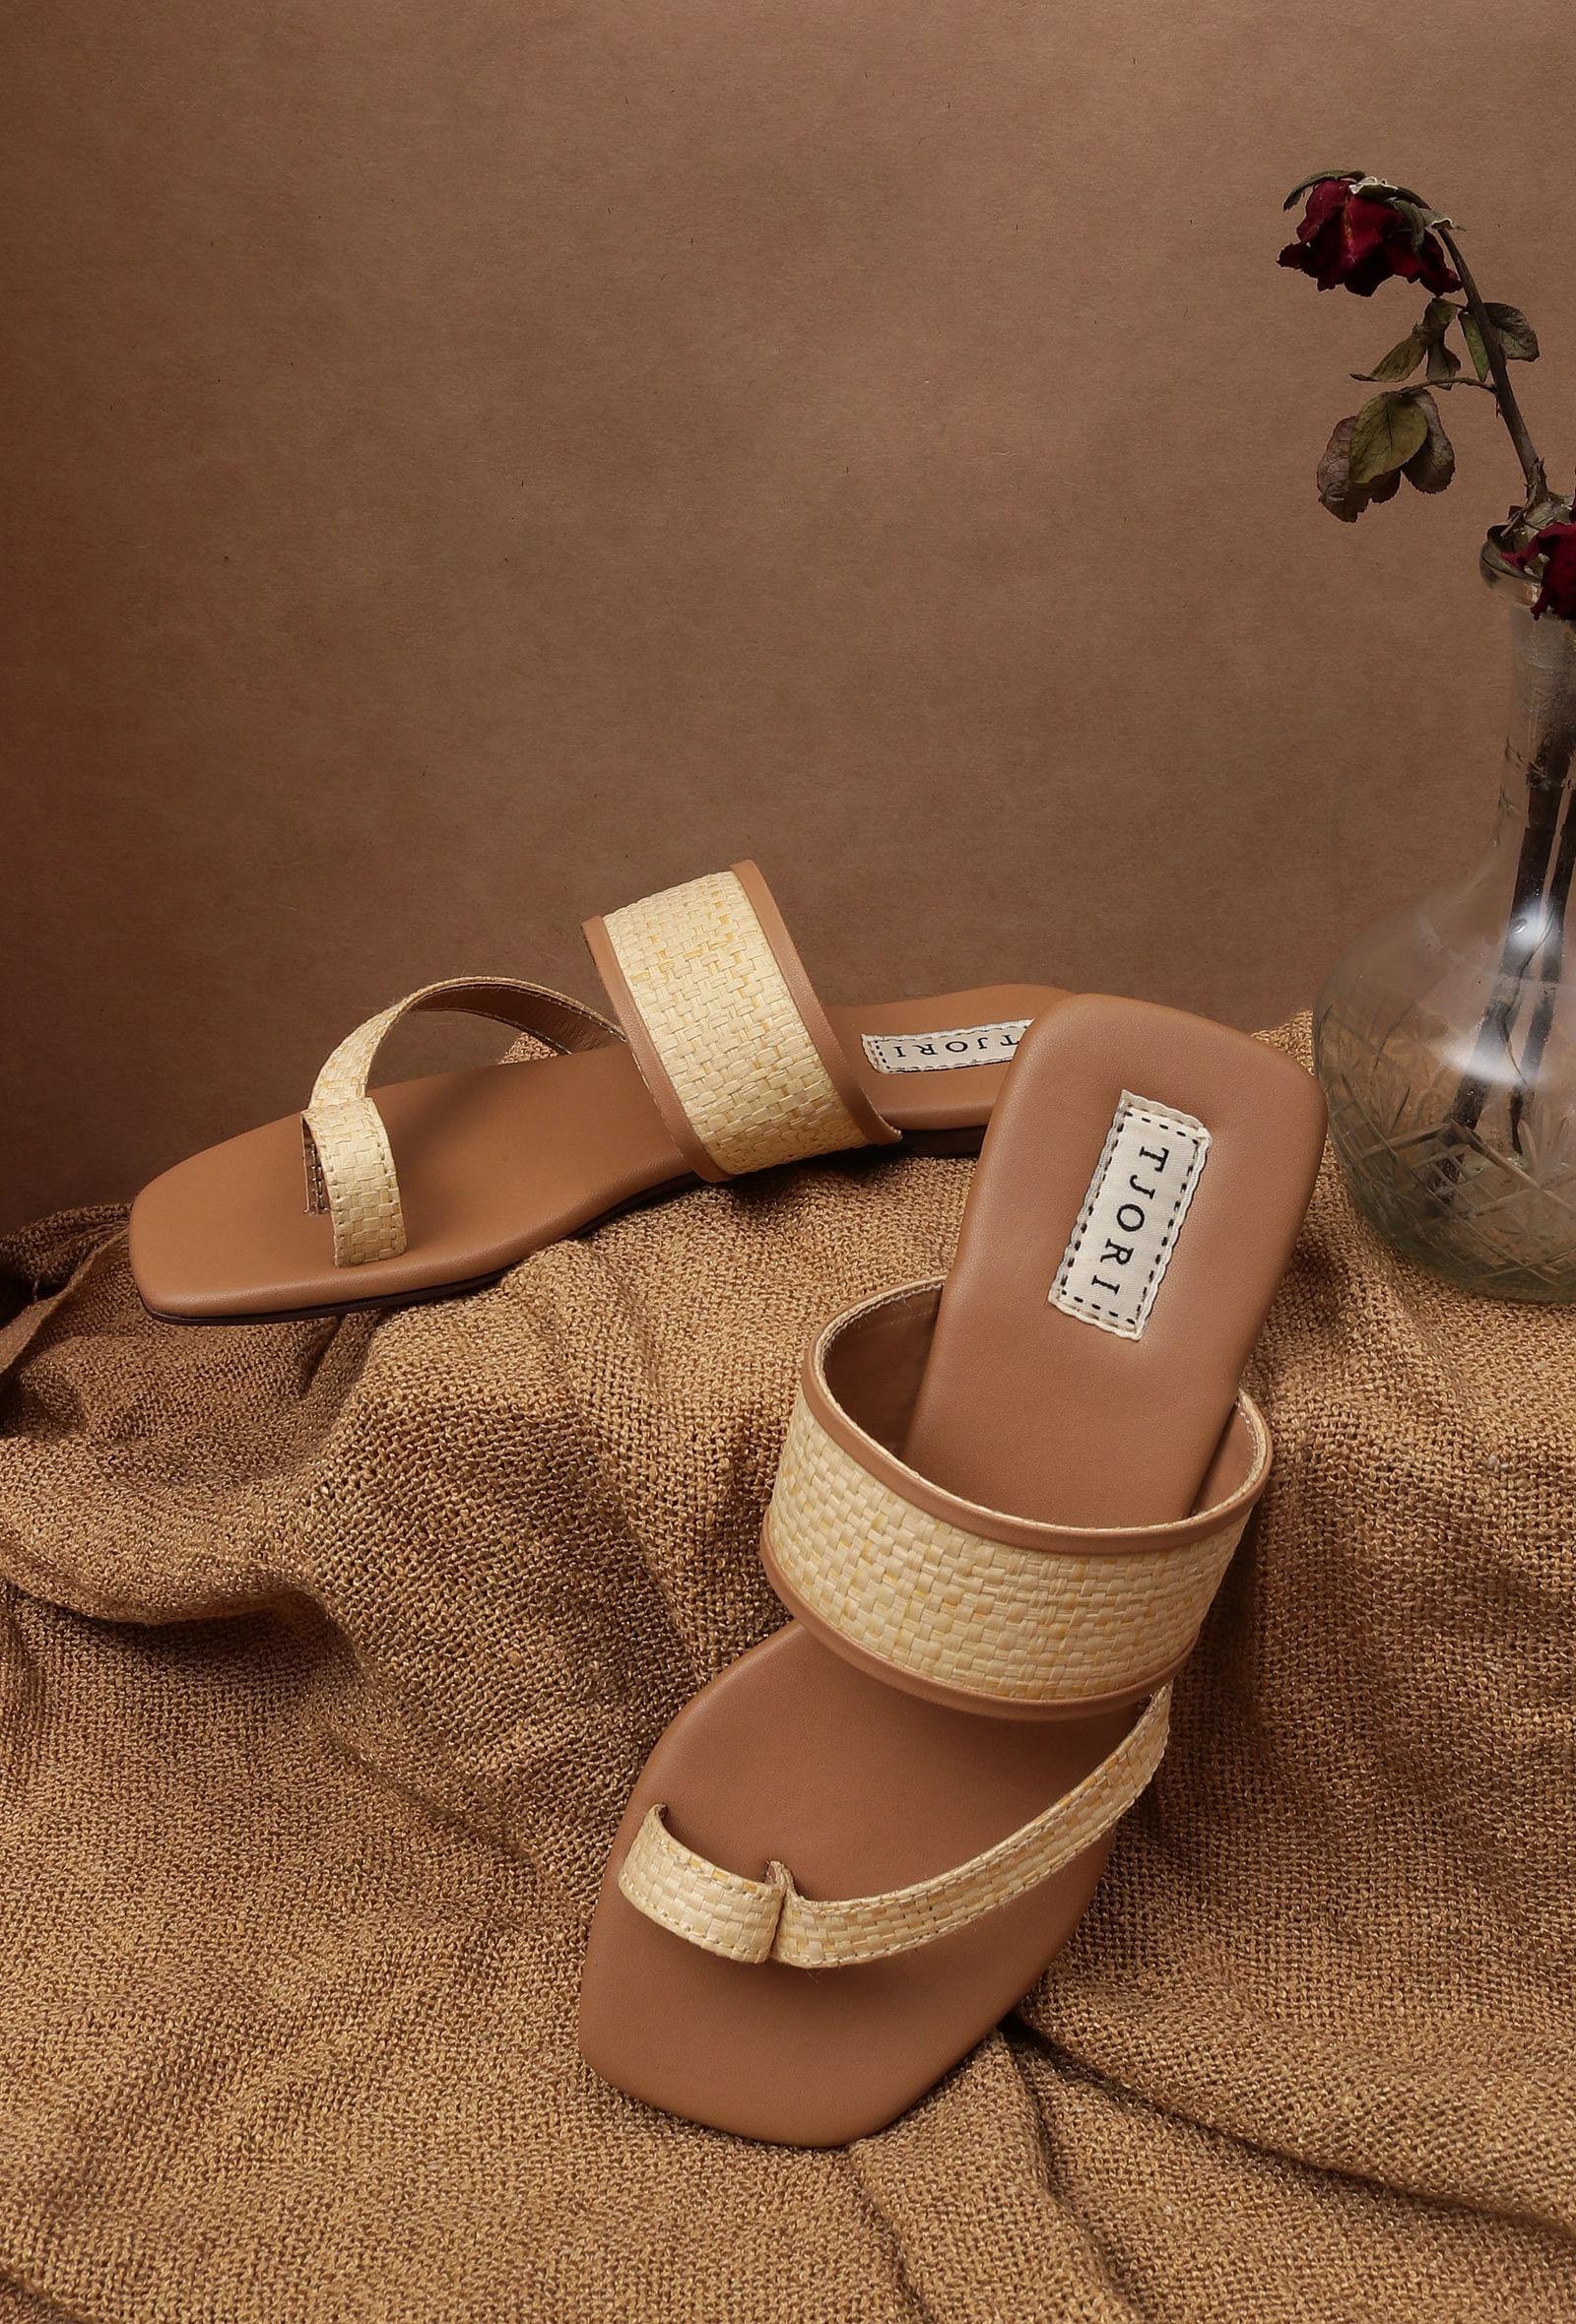 Tan Brown Slip-On Flats With Textured Straps & Insole Cushion Padding